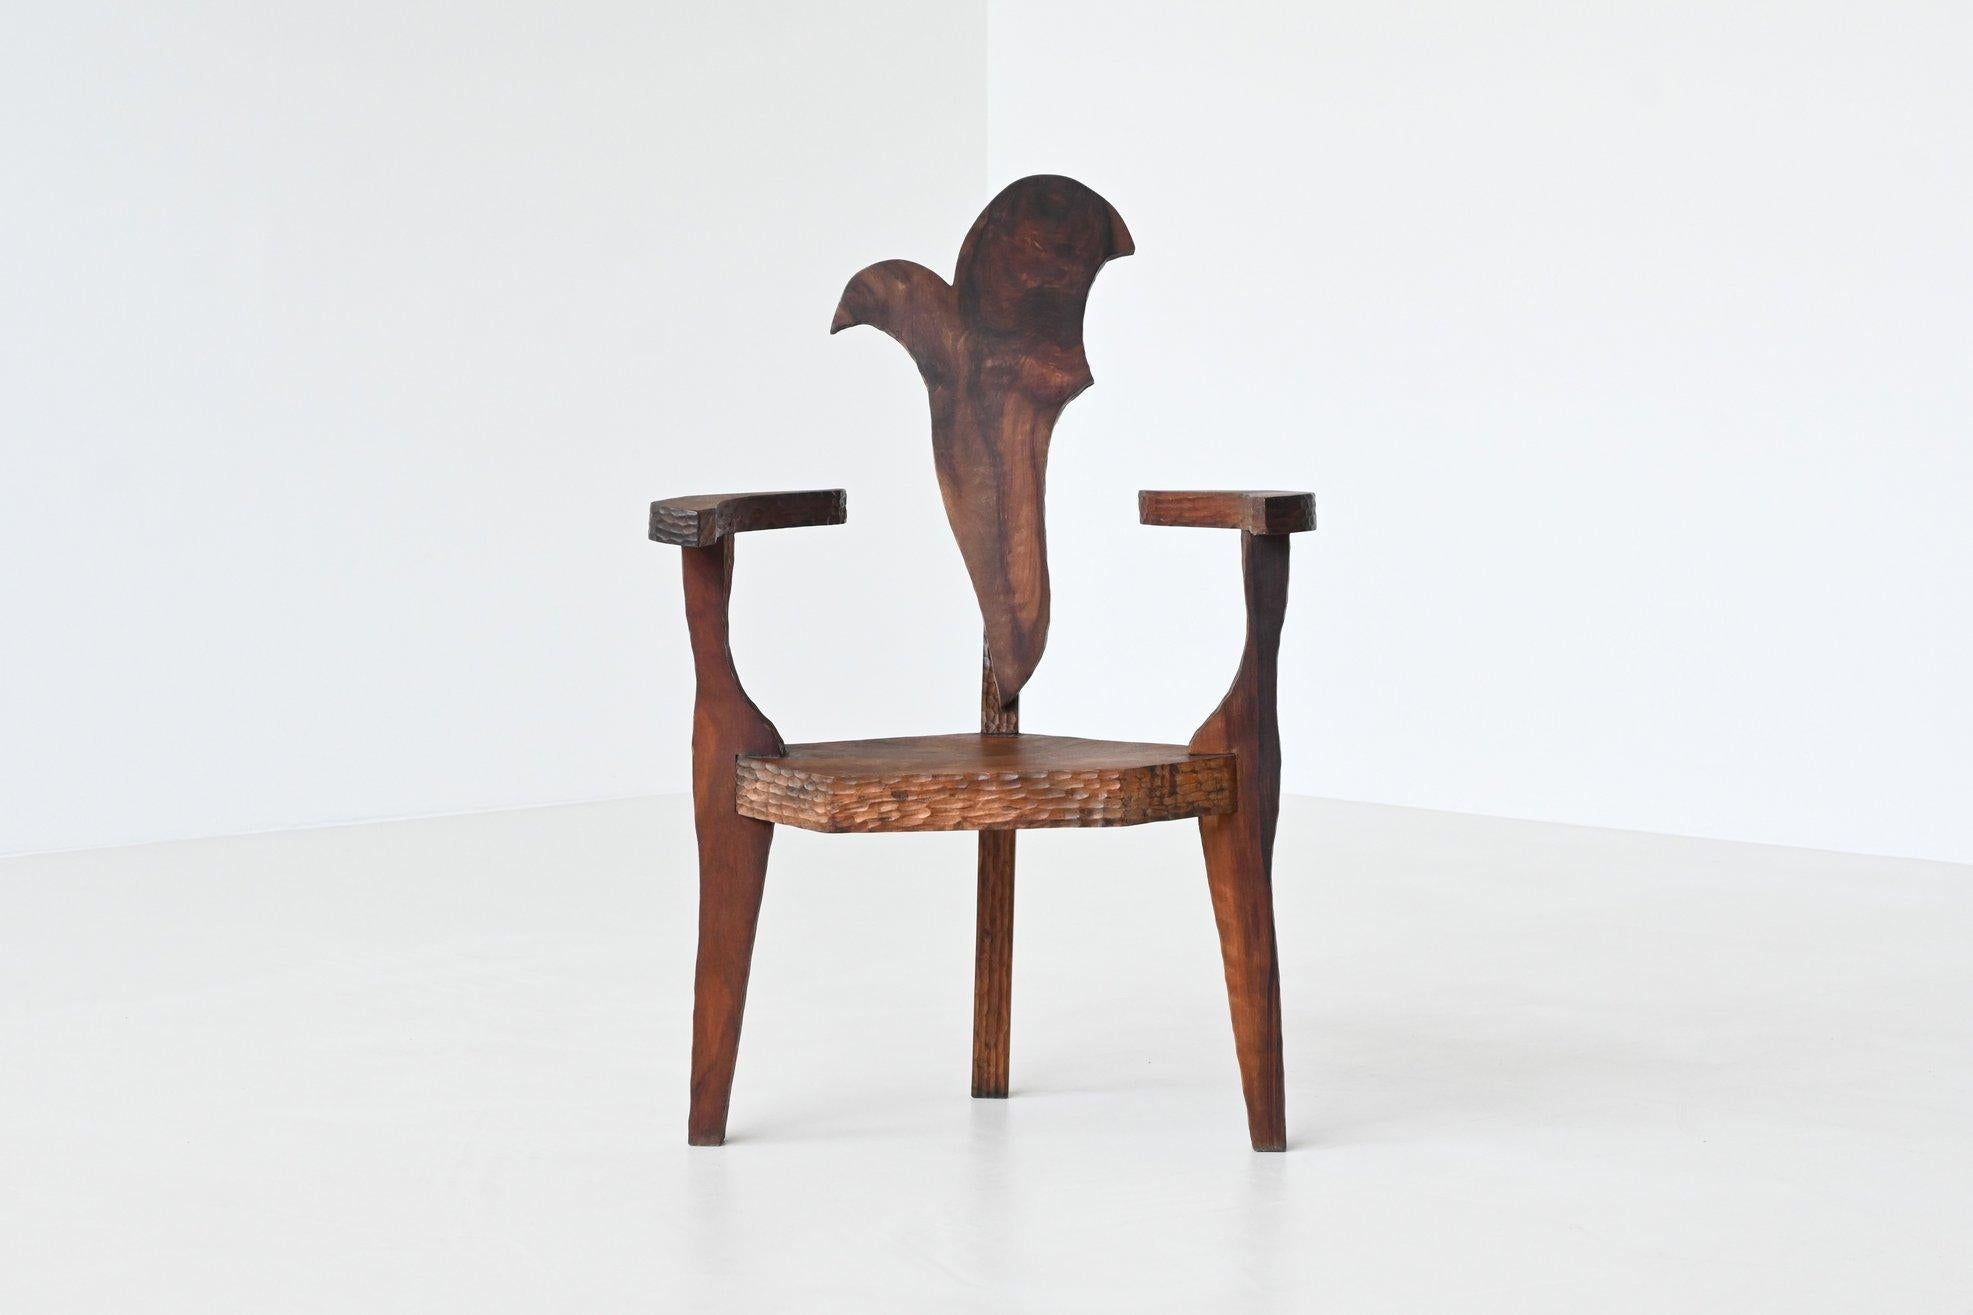 Stunning and unique brutalist armchair by unknown designer or manufacturer, France 1970. This beautifully shaped chair is hand carved from solid tropical hardwood with an amazing grain to it. Very unique and one of a kind. The chair is bought in the